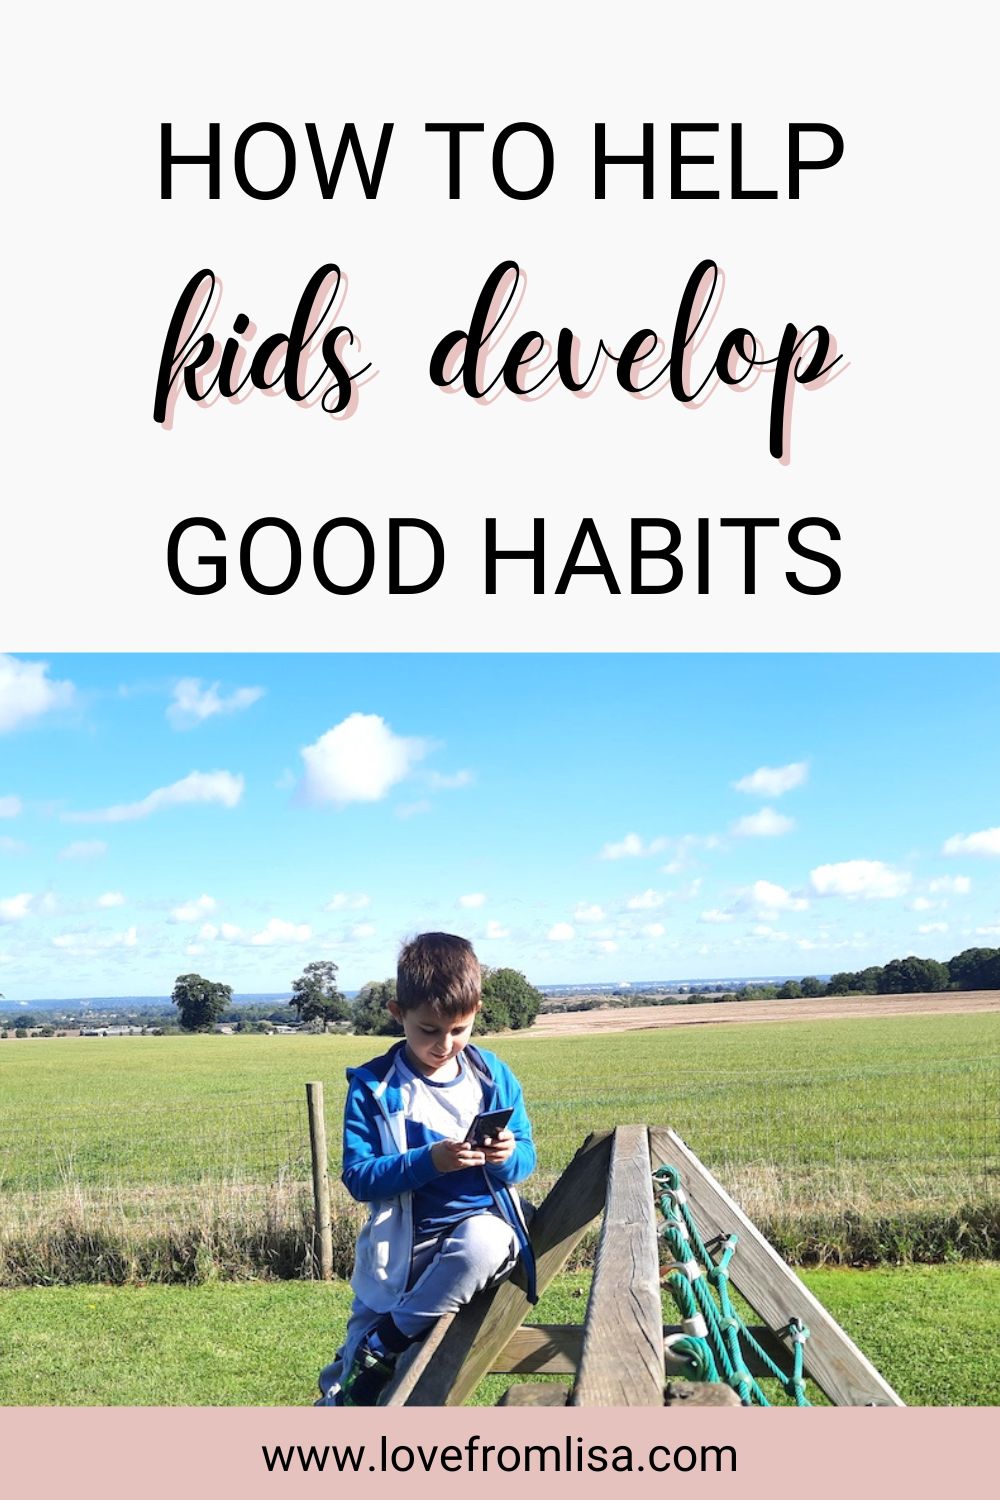 How to help kids develop good habits